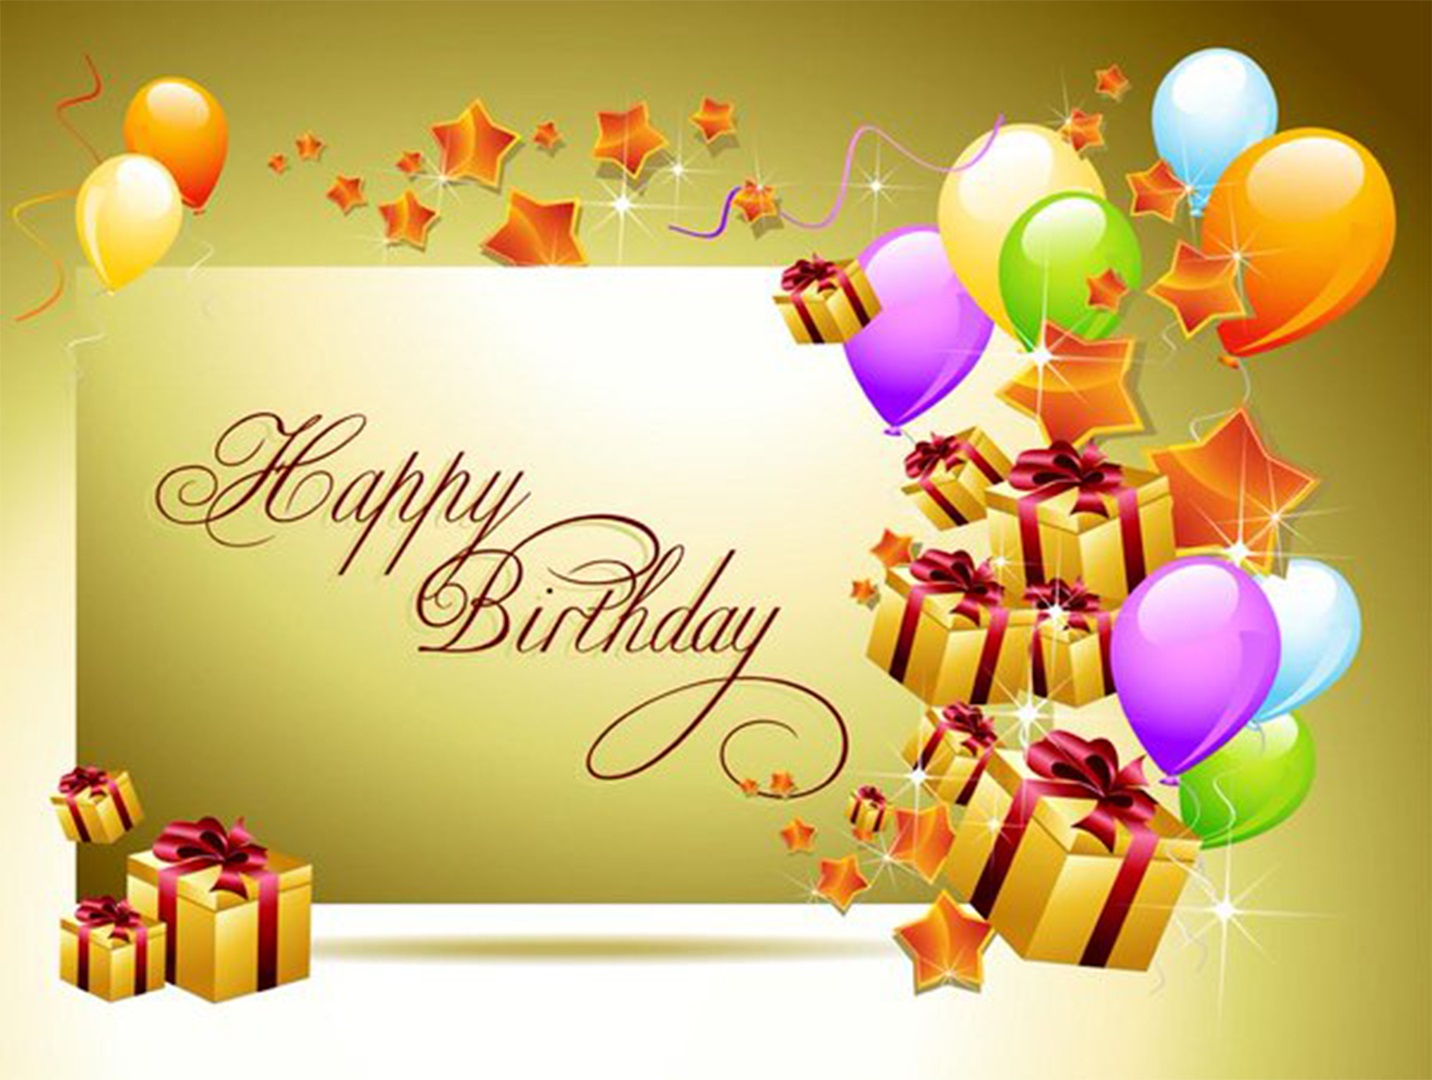 Happy Birthday Cards HD Images | Birthday Greeting Cards Pictures